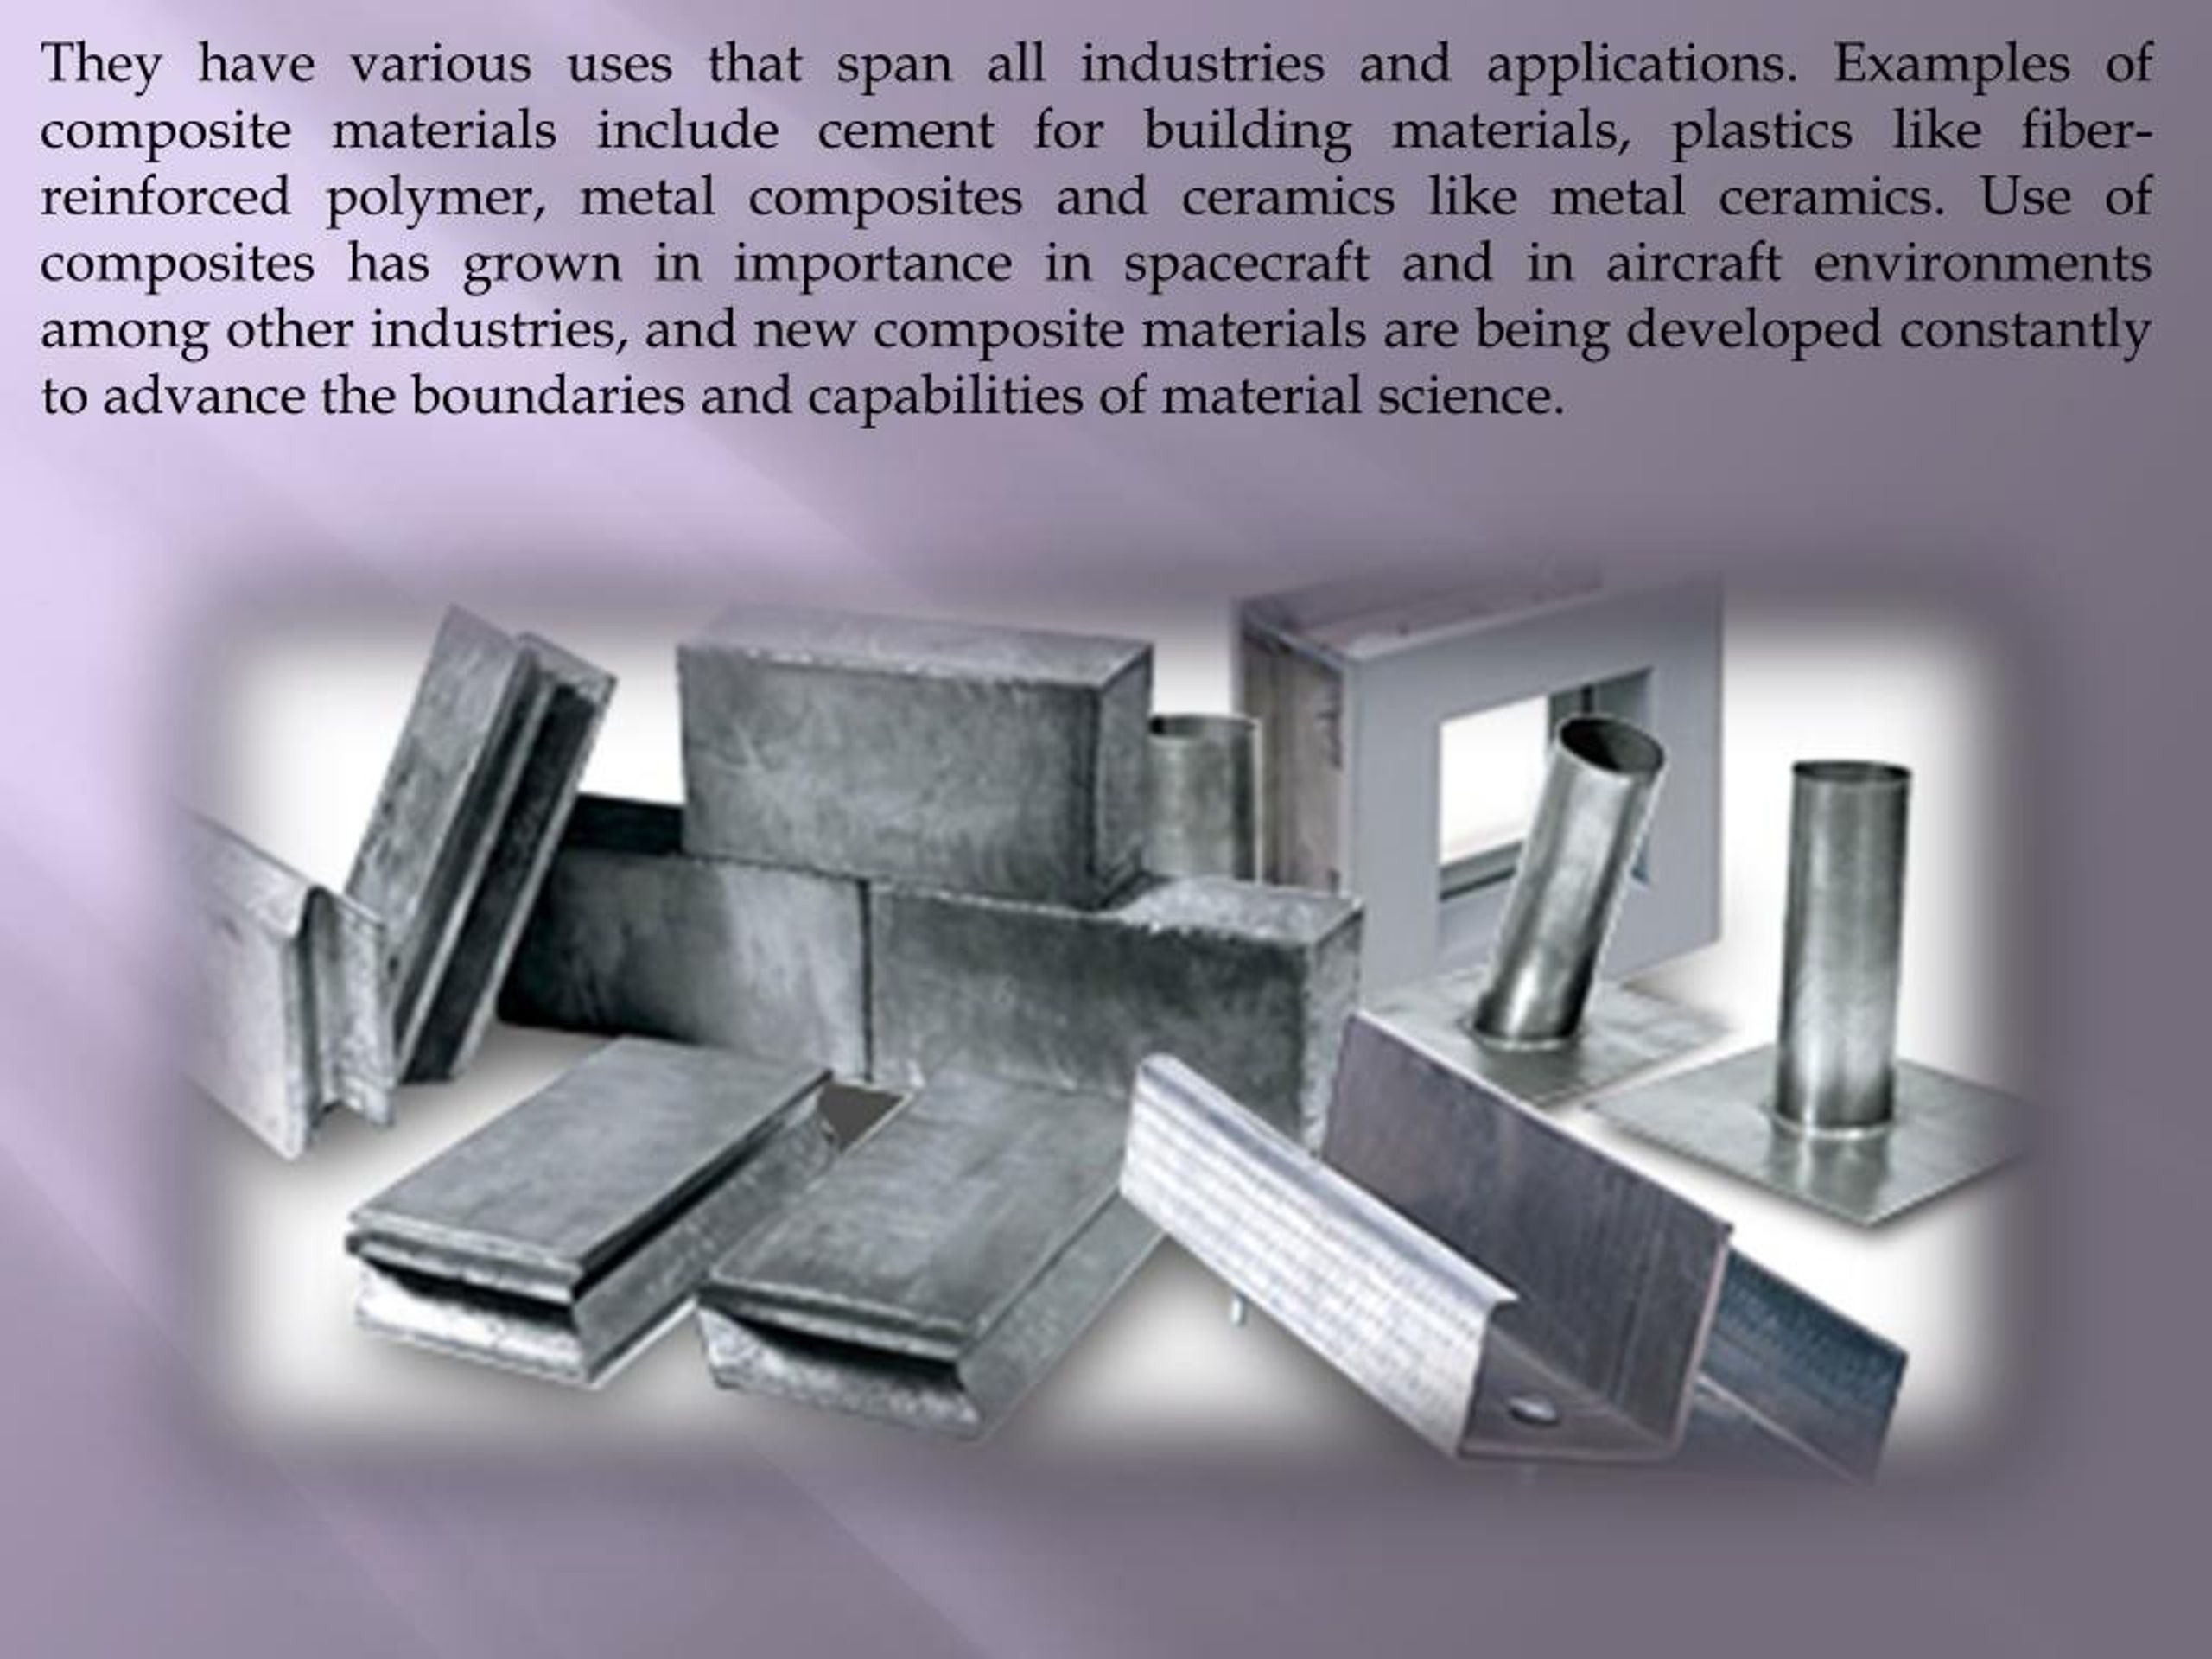 PPT - Applications of Thermoplastic Composites & Properties PowerPoint ...